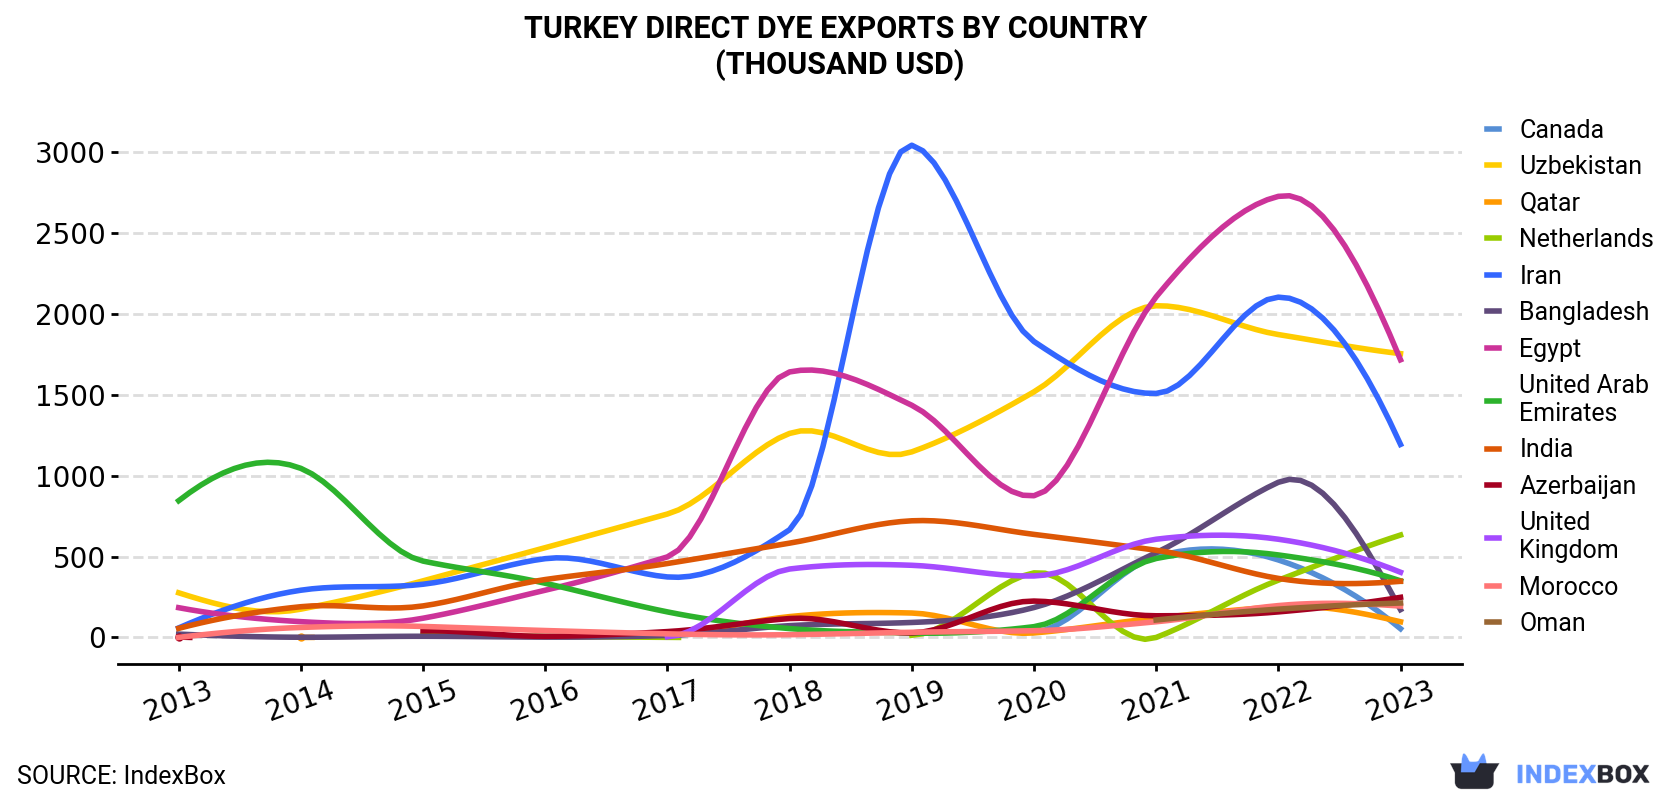 Turkey Direct Dye Exports By Country (Thousand USD)